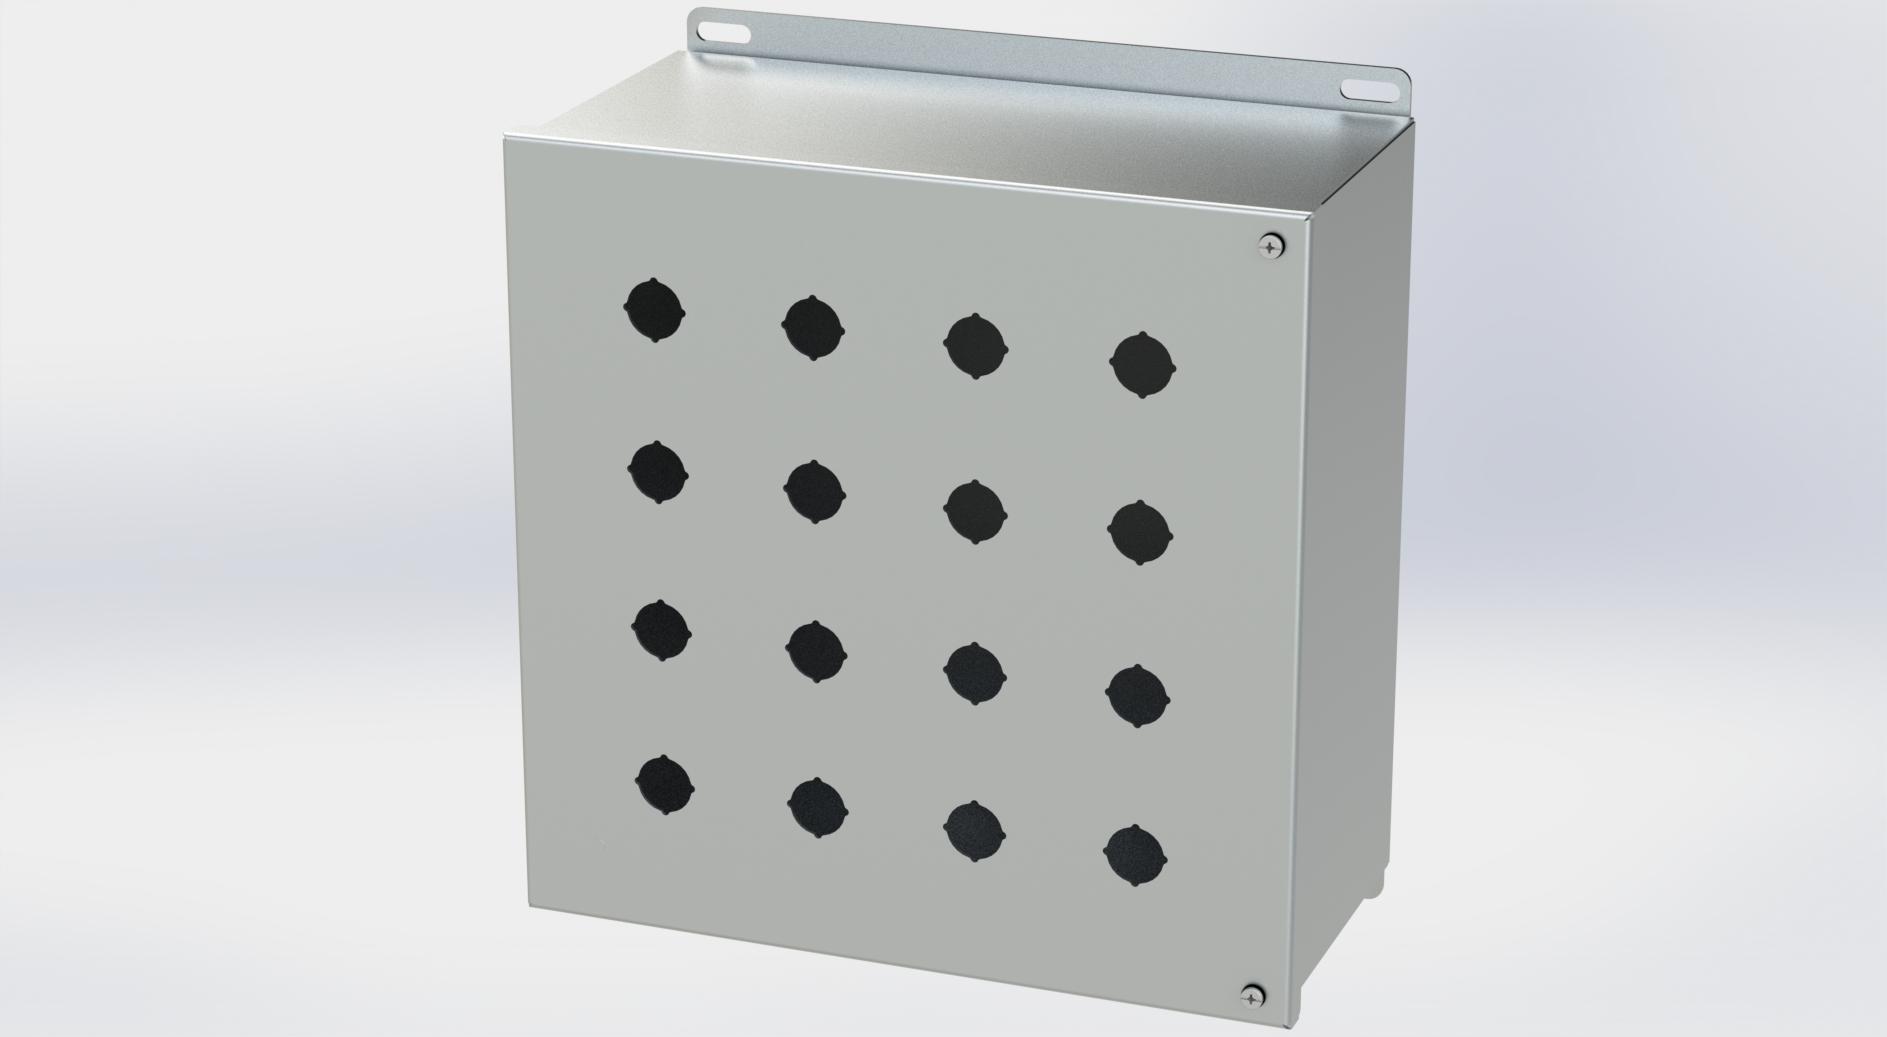 Saginaw Control SCE-16PBHSSI S.S. PB Enclosure, Height:12.13", Width:12.00", Depth:6.00", #4 brushed finish on all exterior surfaces. Optional sub-panels are powder coated white.